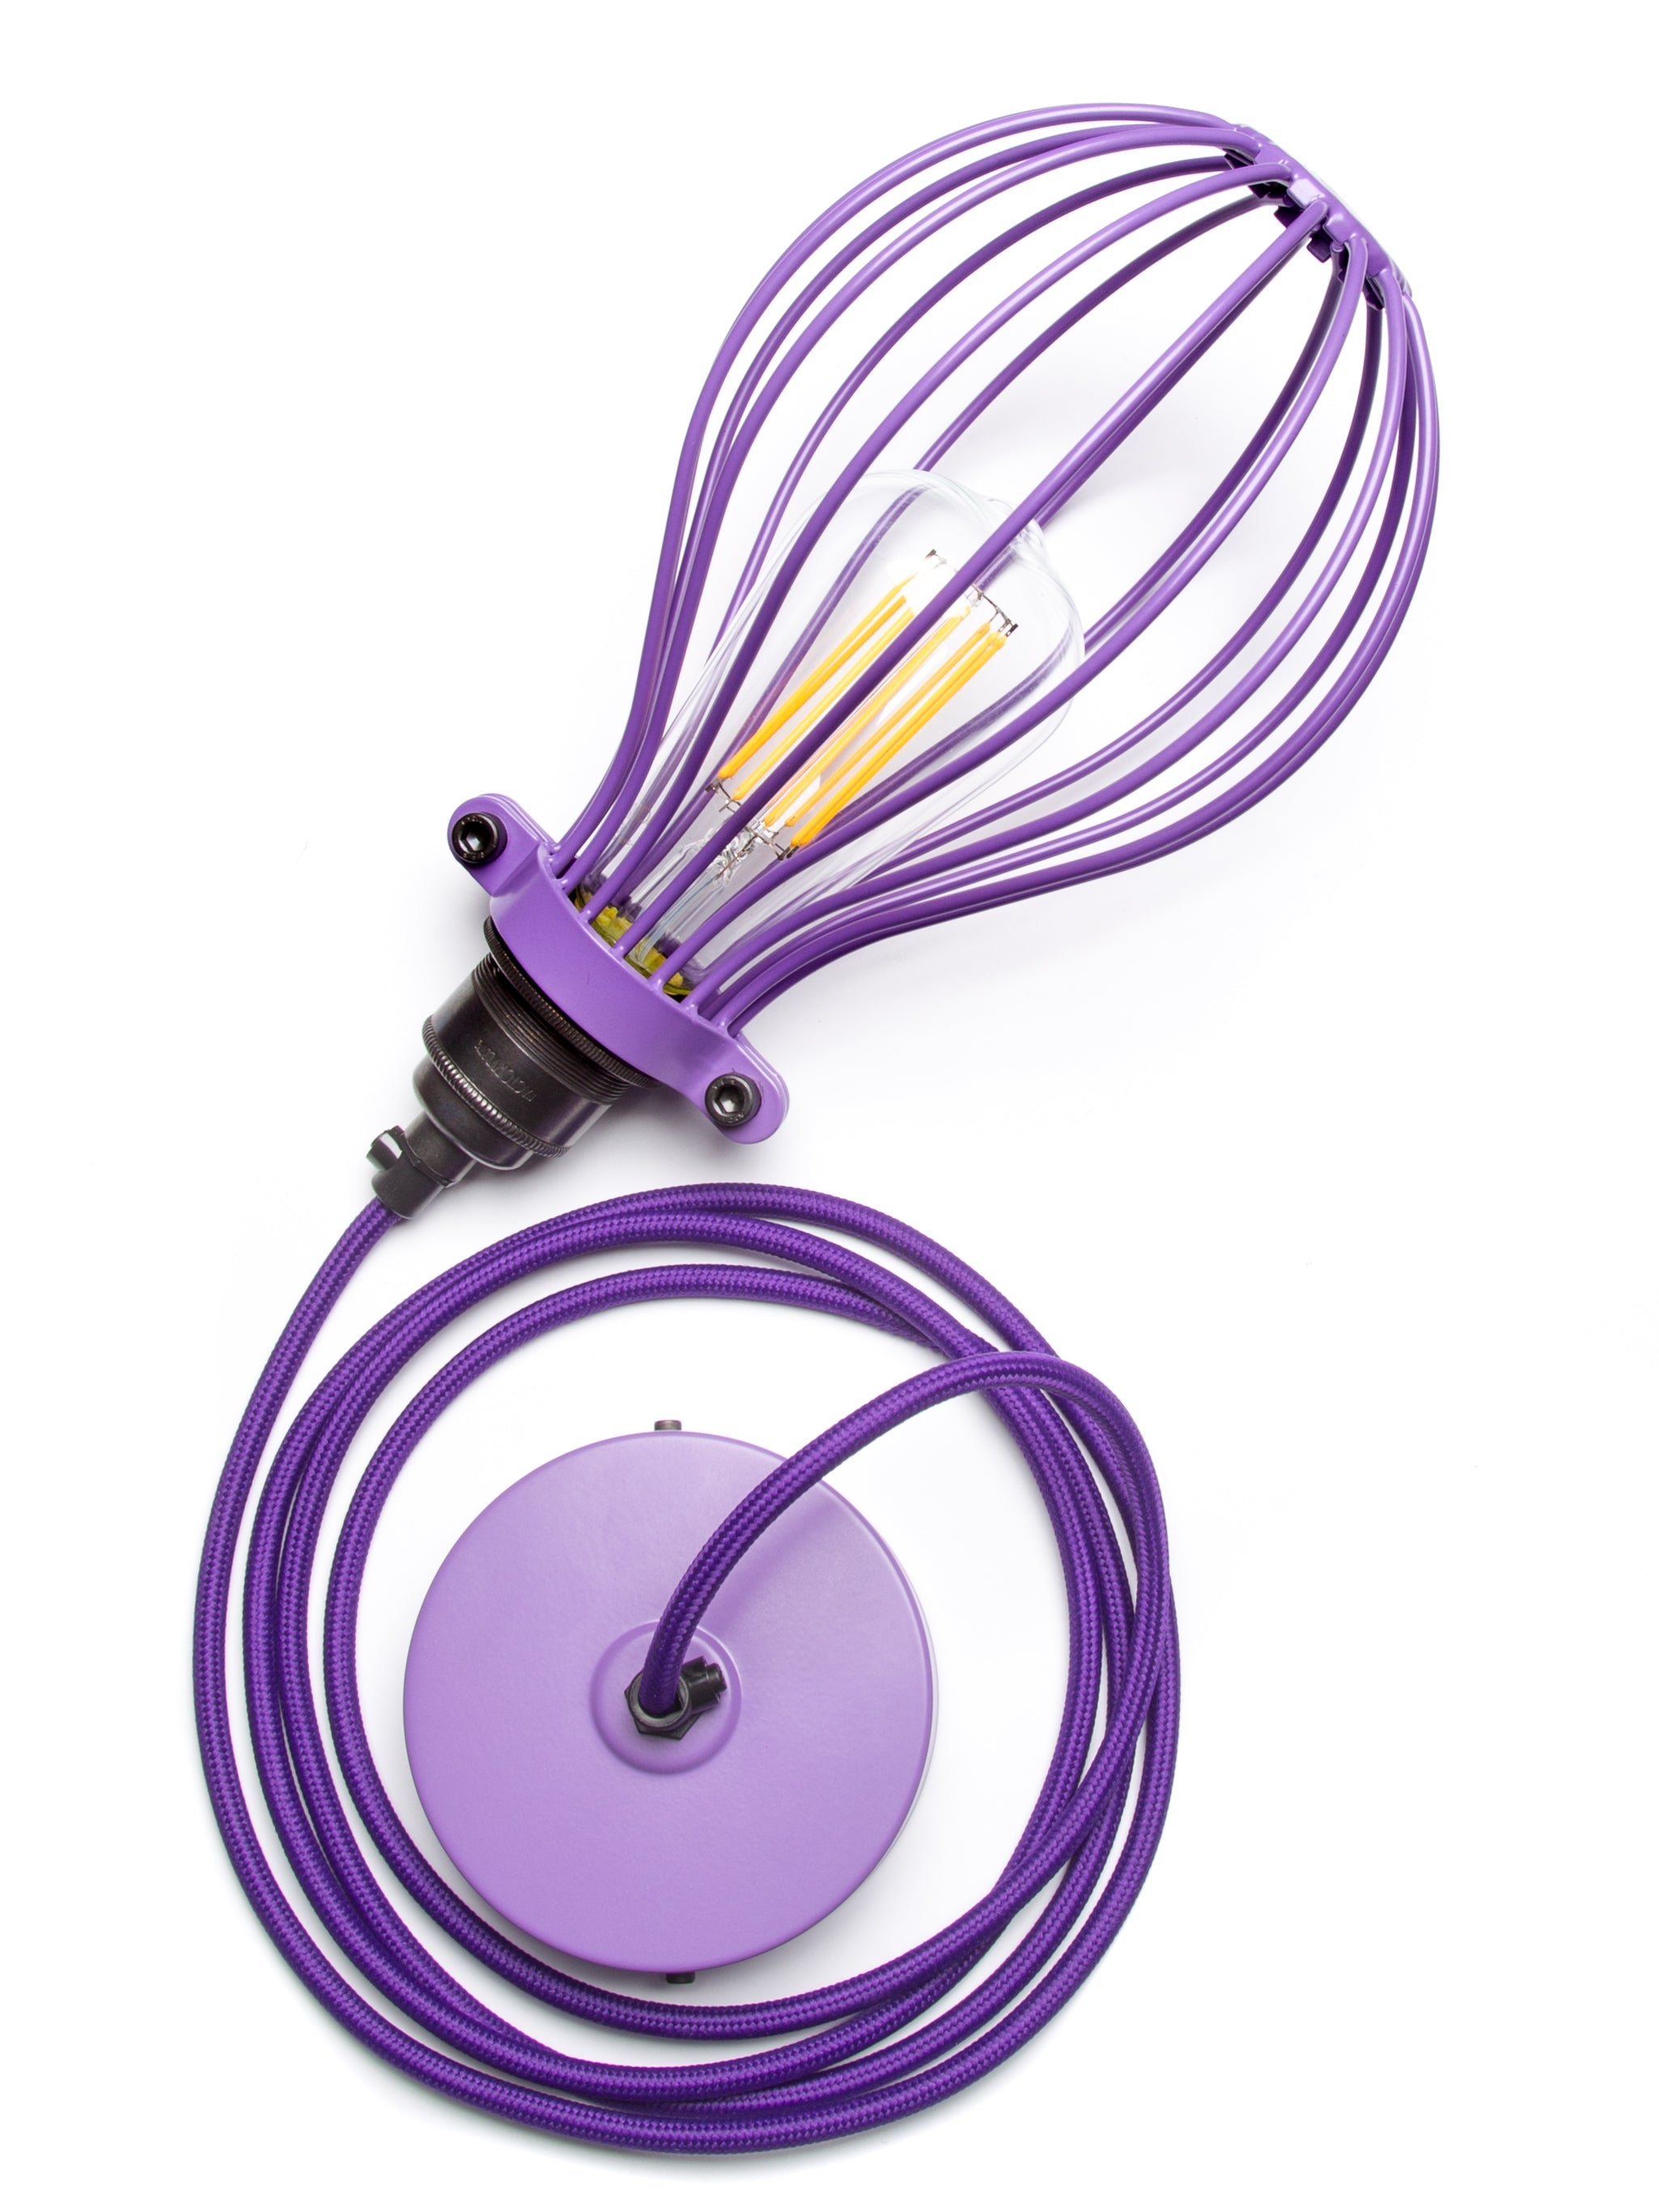 Purple Balloon Cage Pendant | Self-Assembly Kit | End-Of-Line